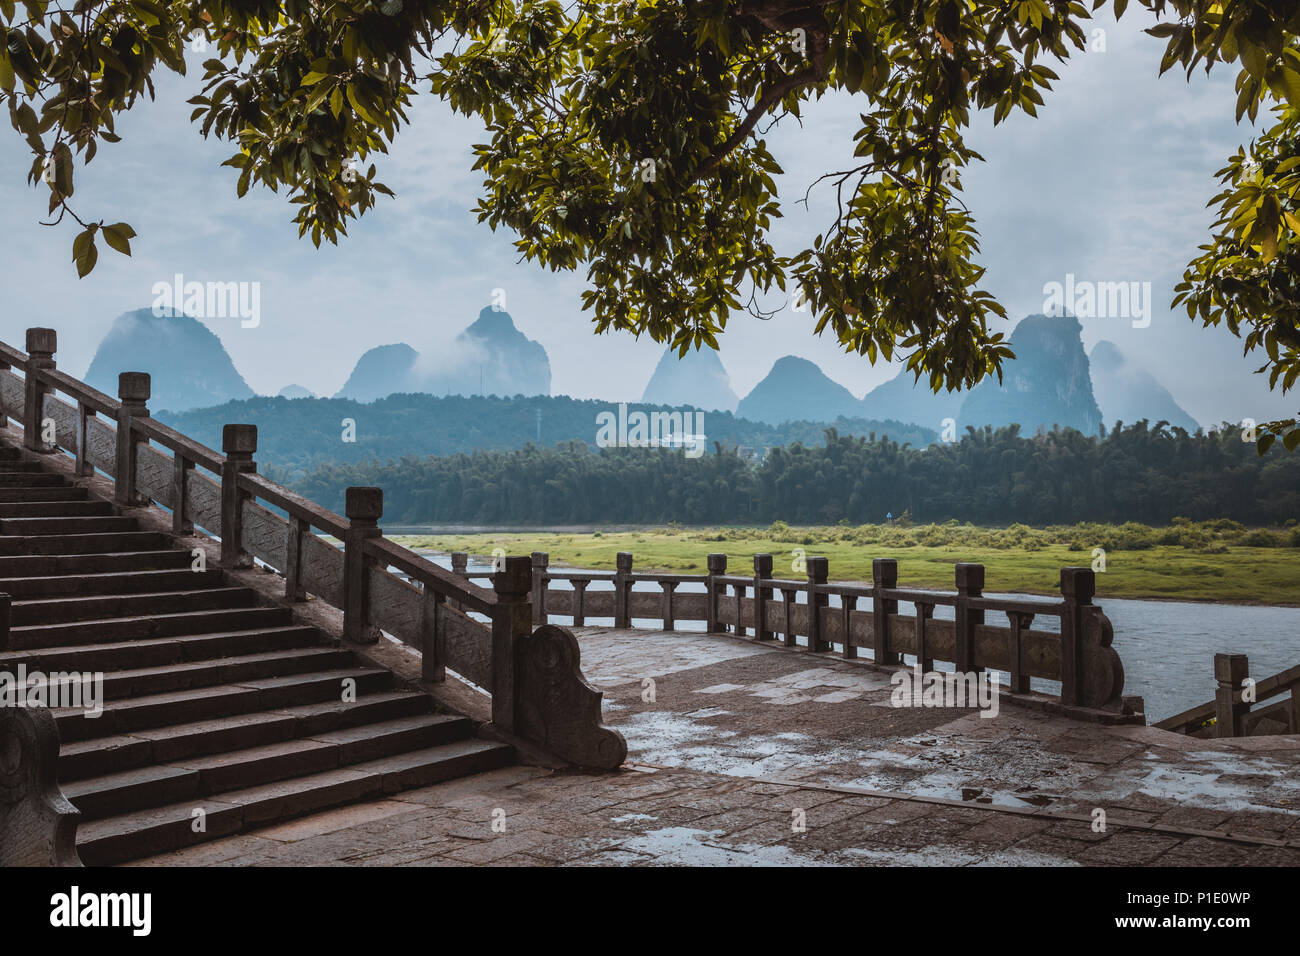 Scenic landscape at Yangshuo County of Guilin, China. View of beautiful karst mountains and the Li River (Lijiang River) with azure water. Amazing gre Stock Photo